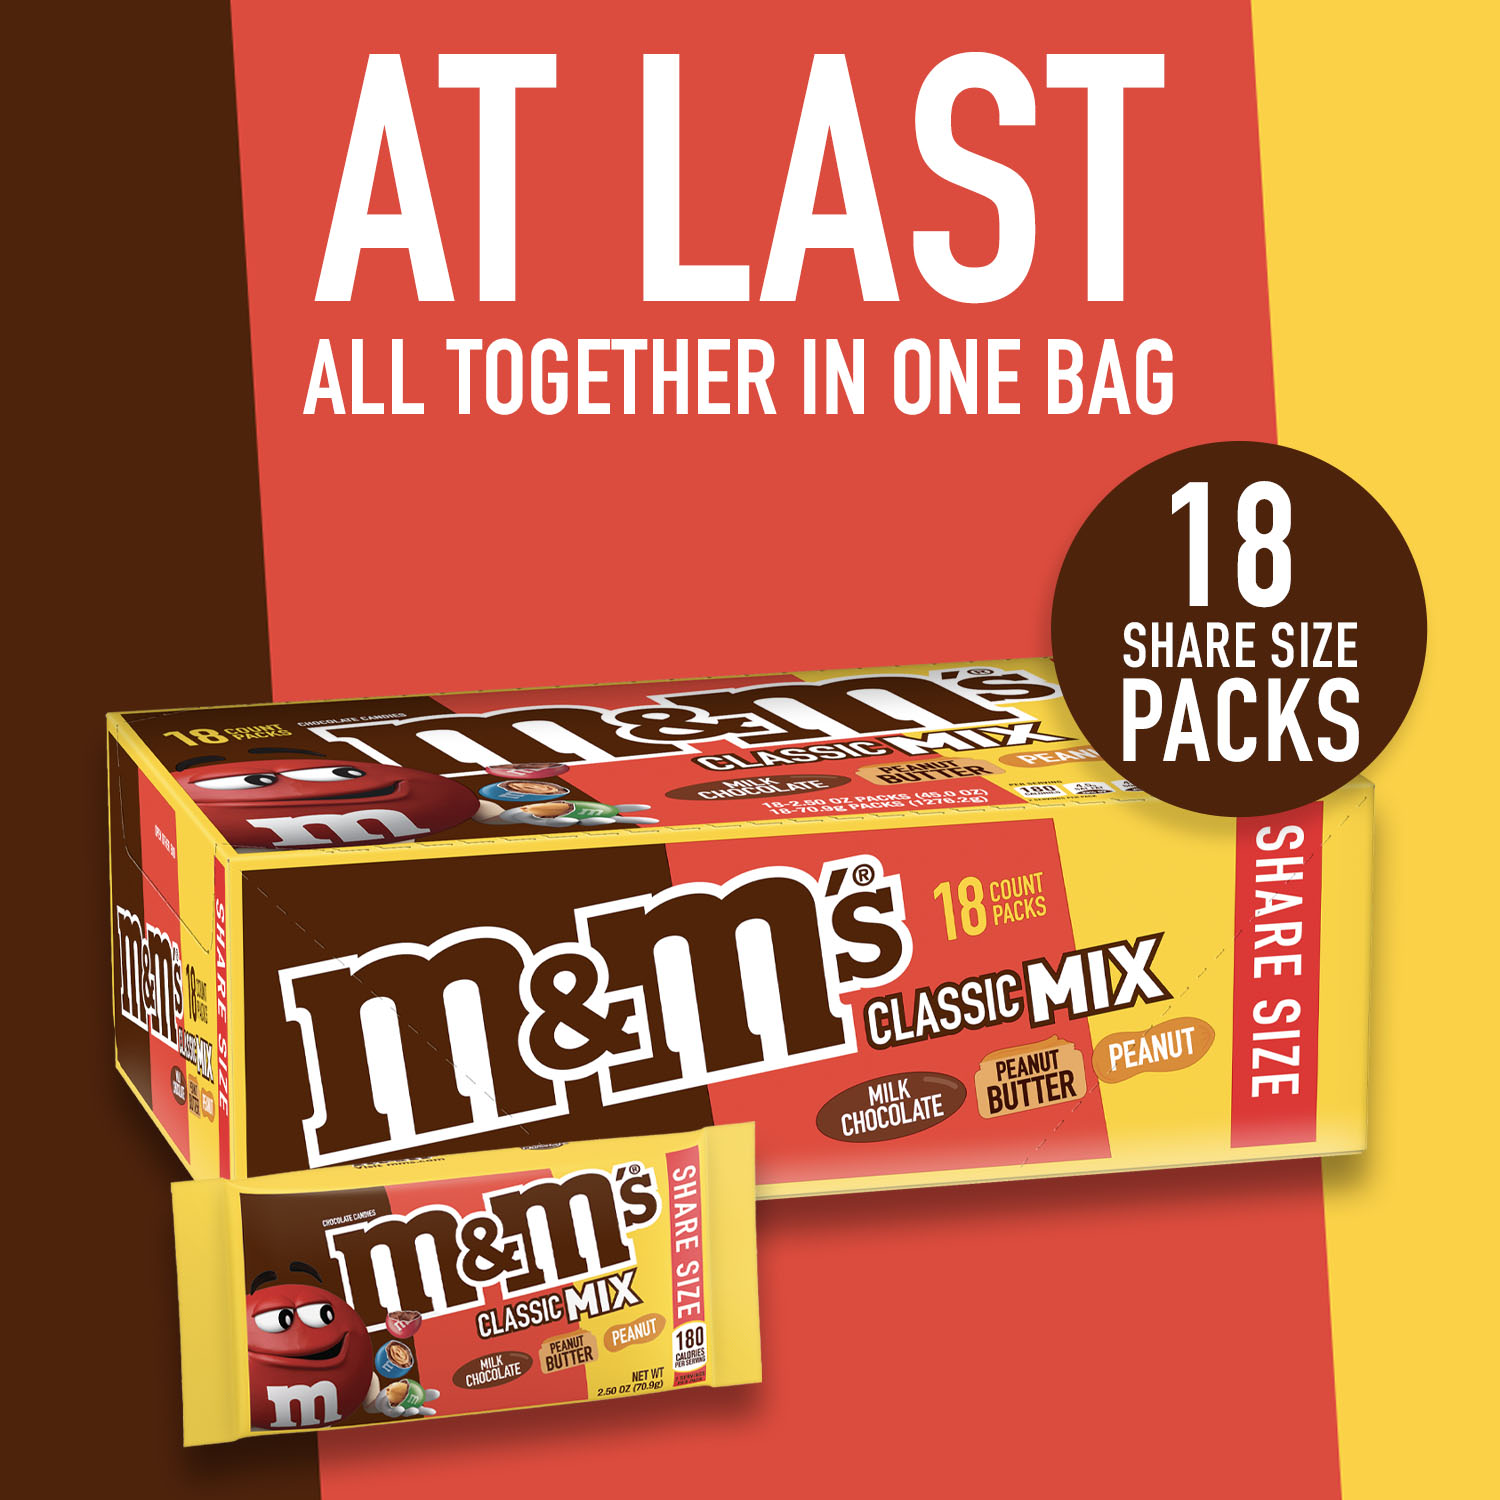 M&M'S Chocolate Candy Variety Pack, 18 Count - My247Mart